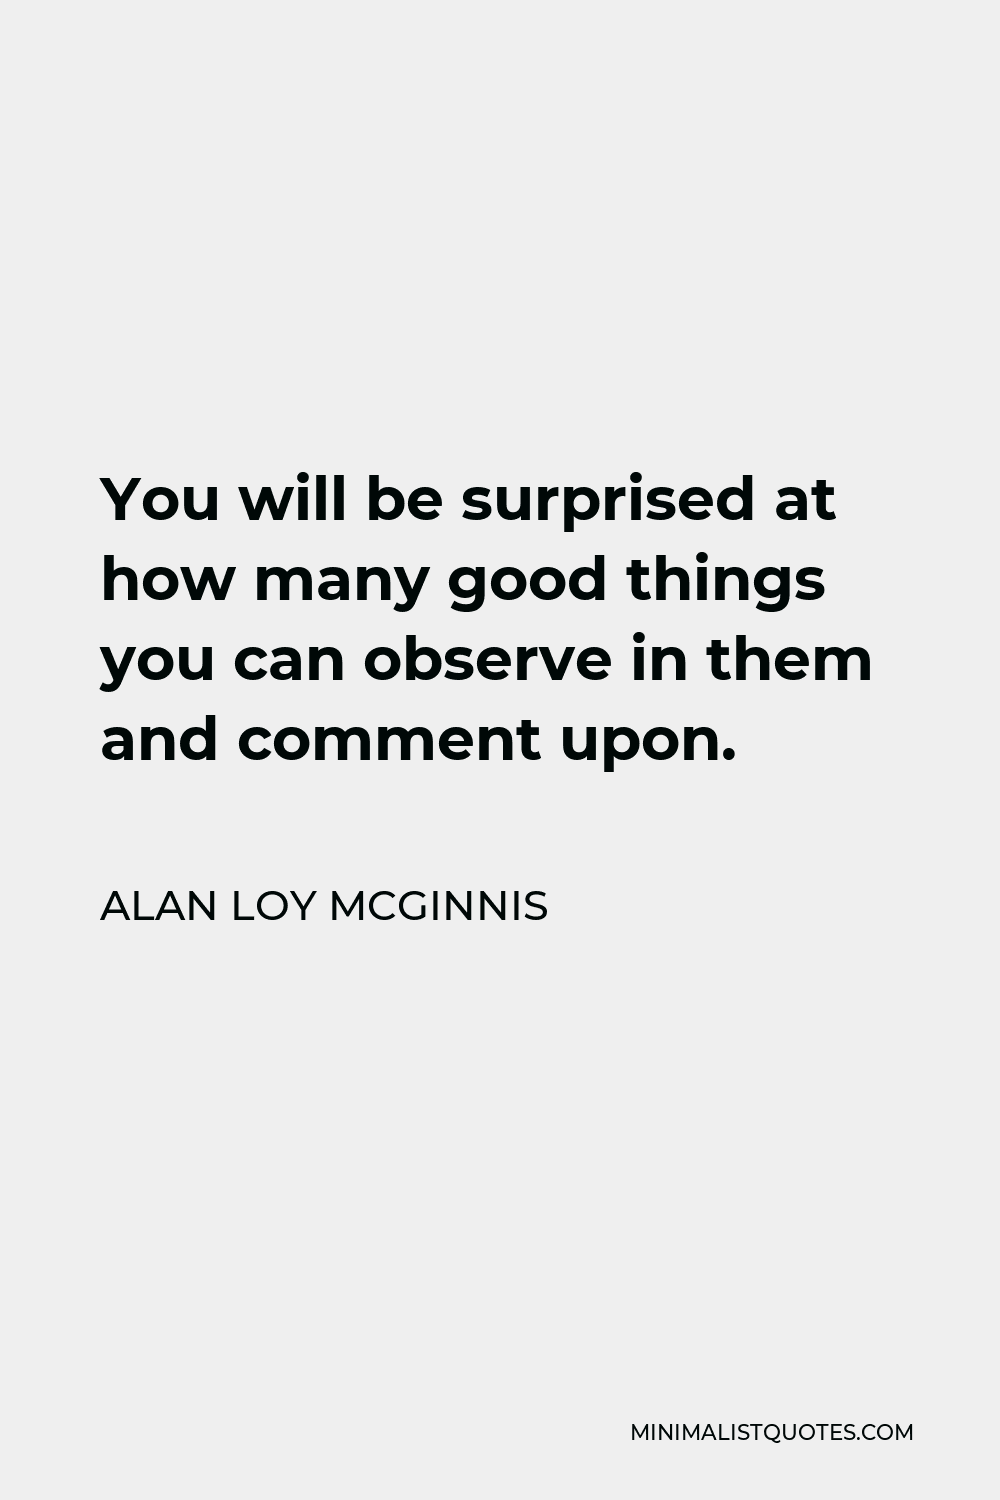 Alan Loy McGinnis Quote - You will be surprised at how many good things you can observe in them and comment upon.